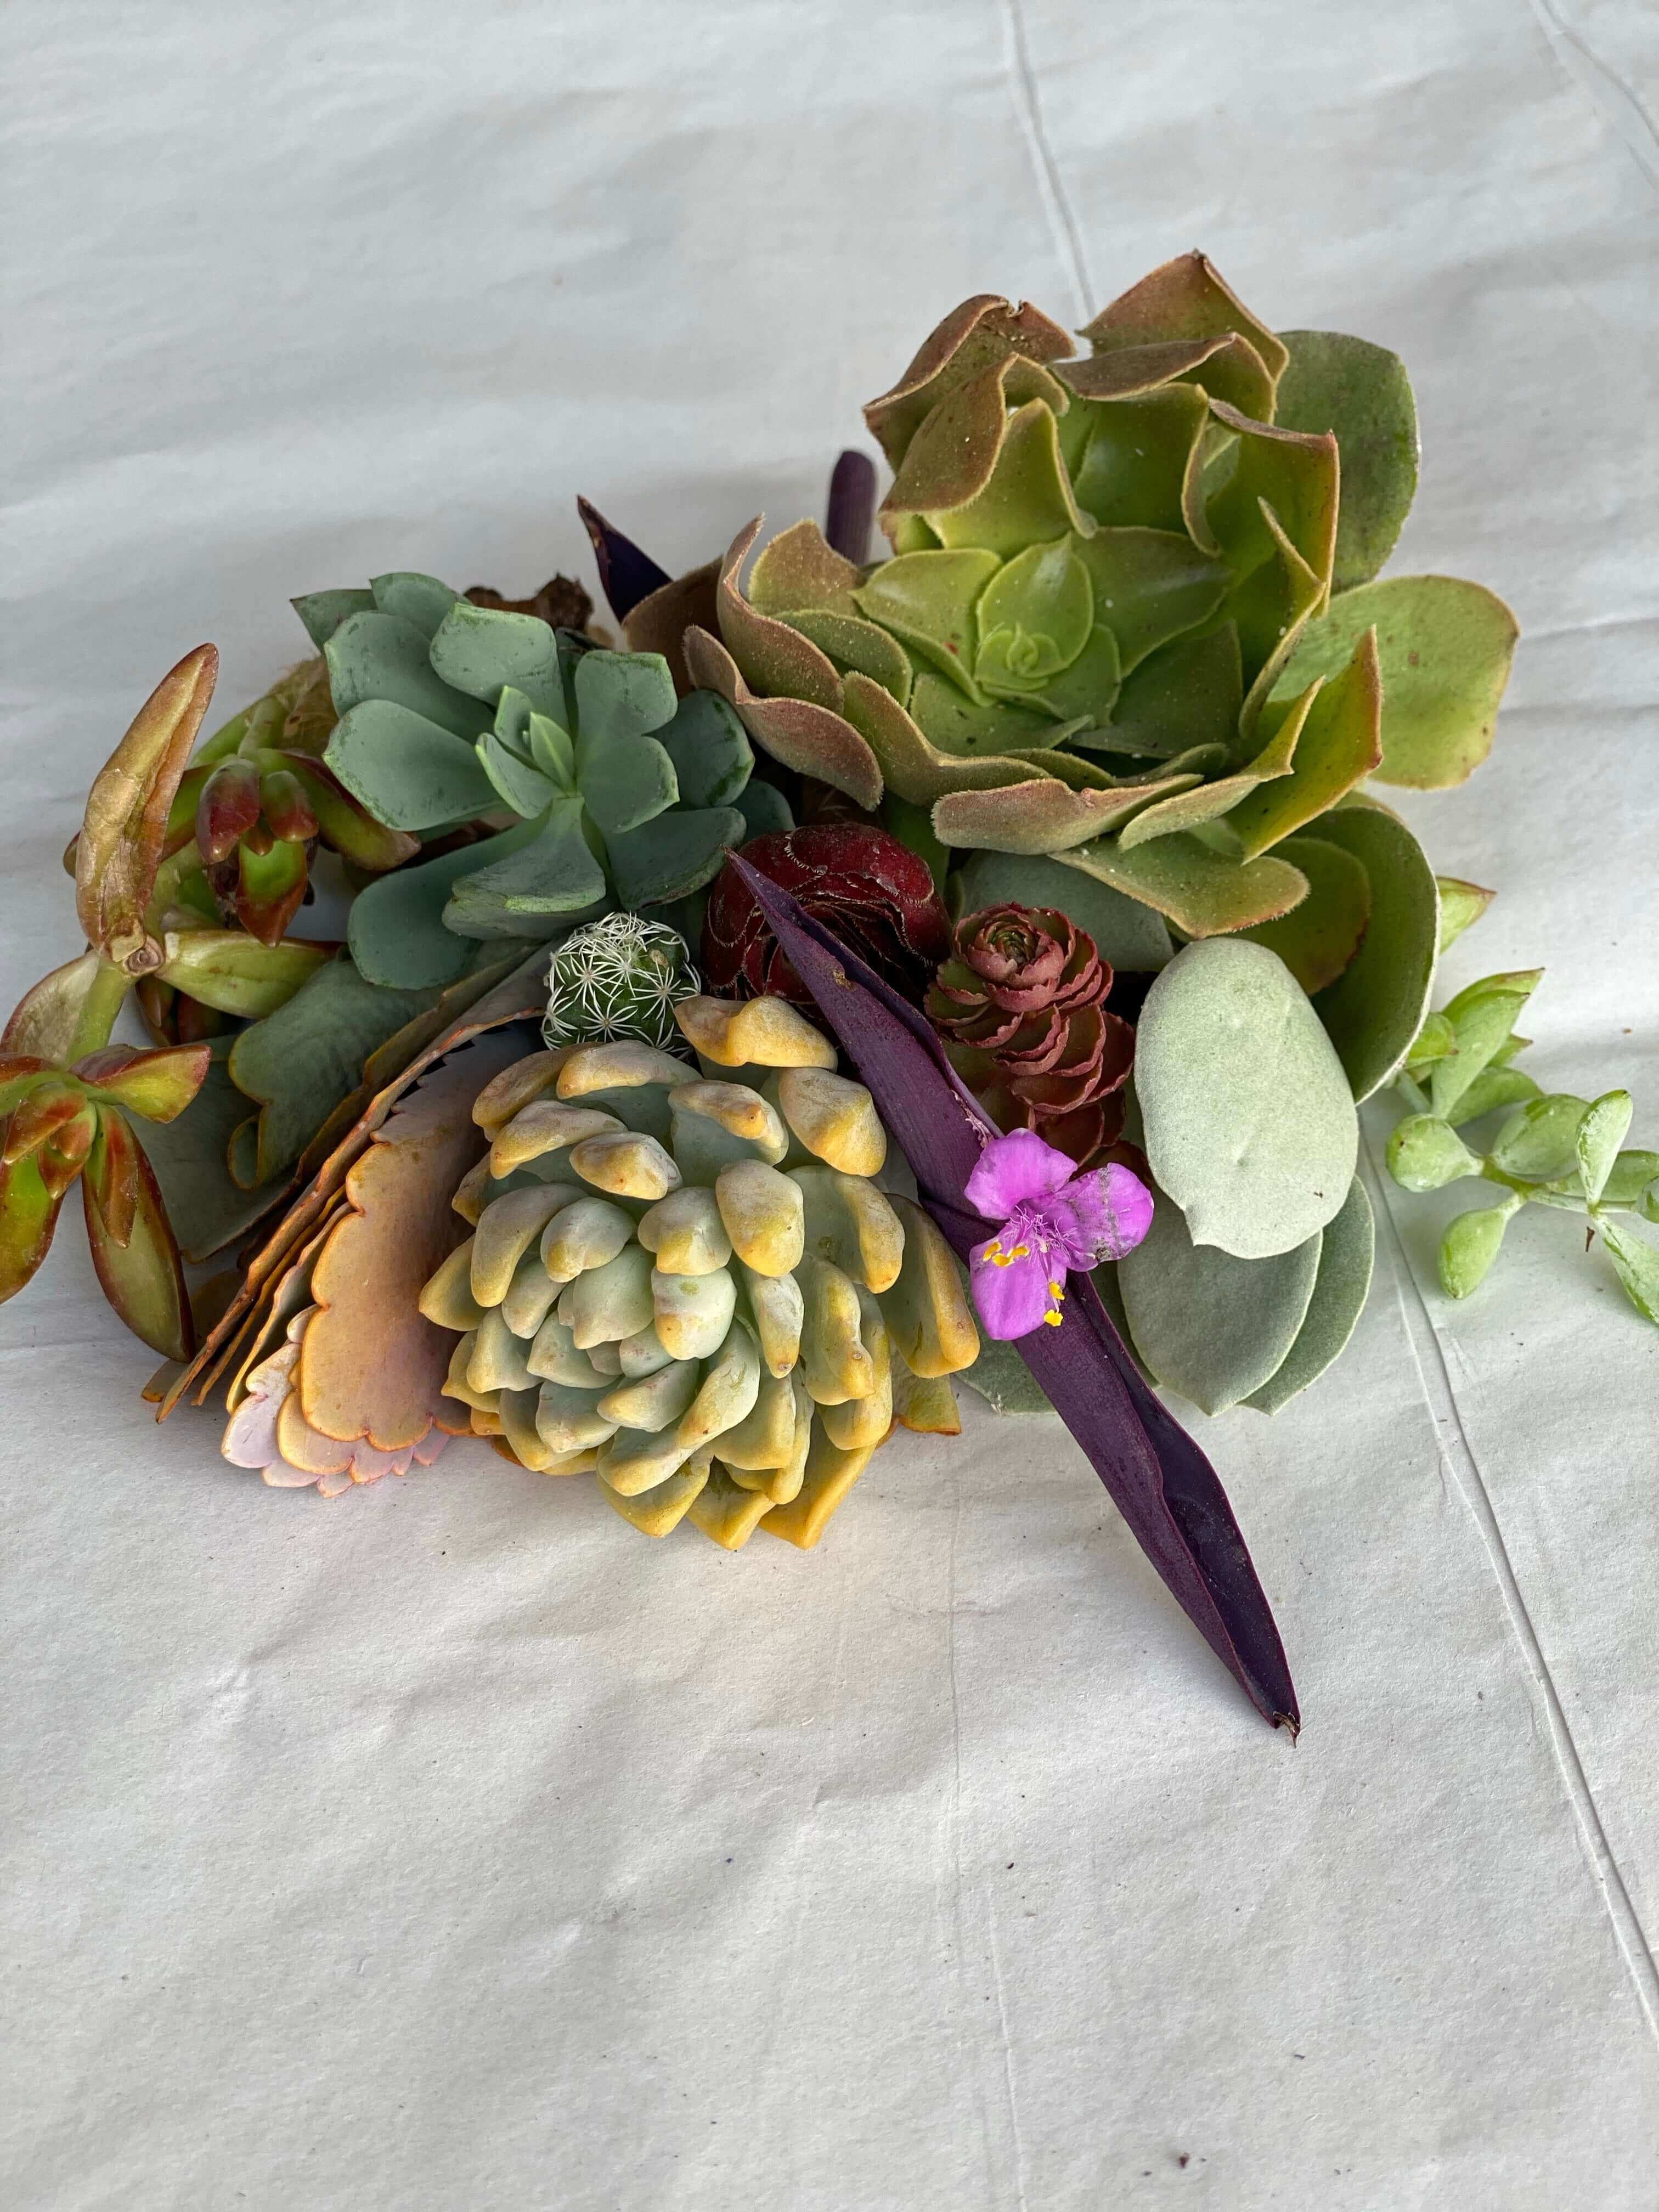 Close-up view of diverse succulent cuttings from the set, highlighting the different shapes and vibrant colors.